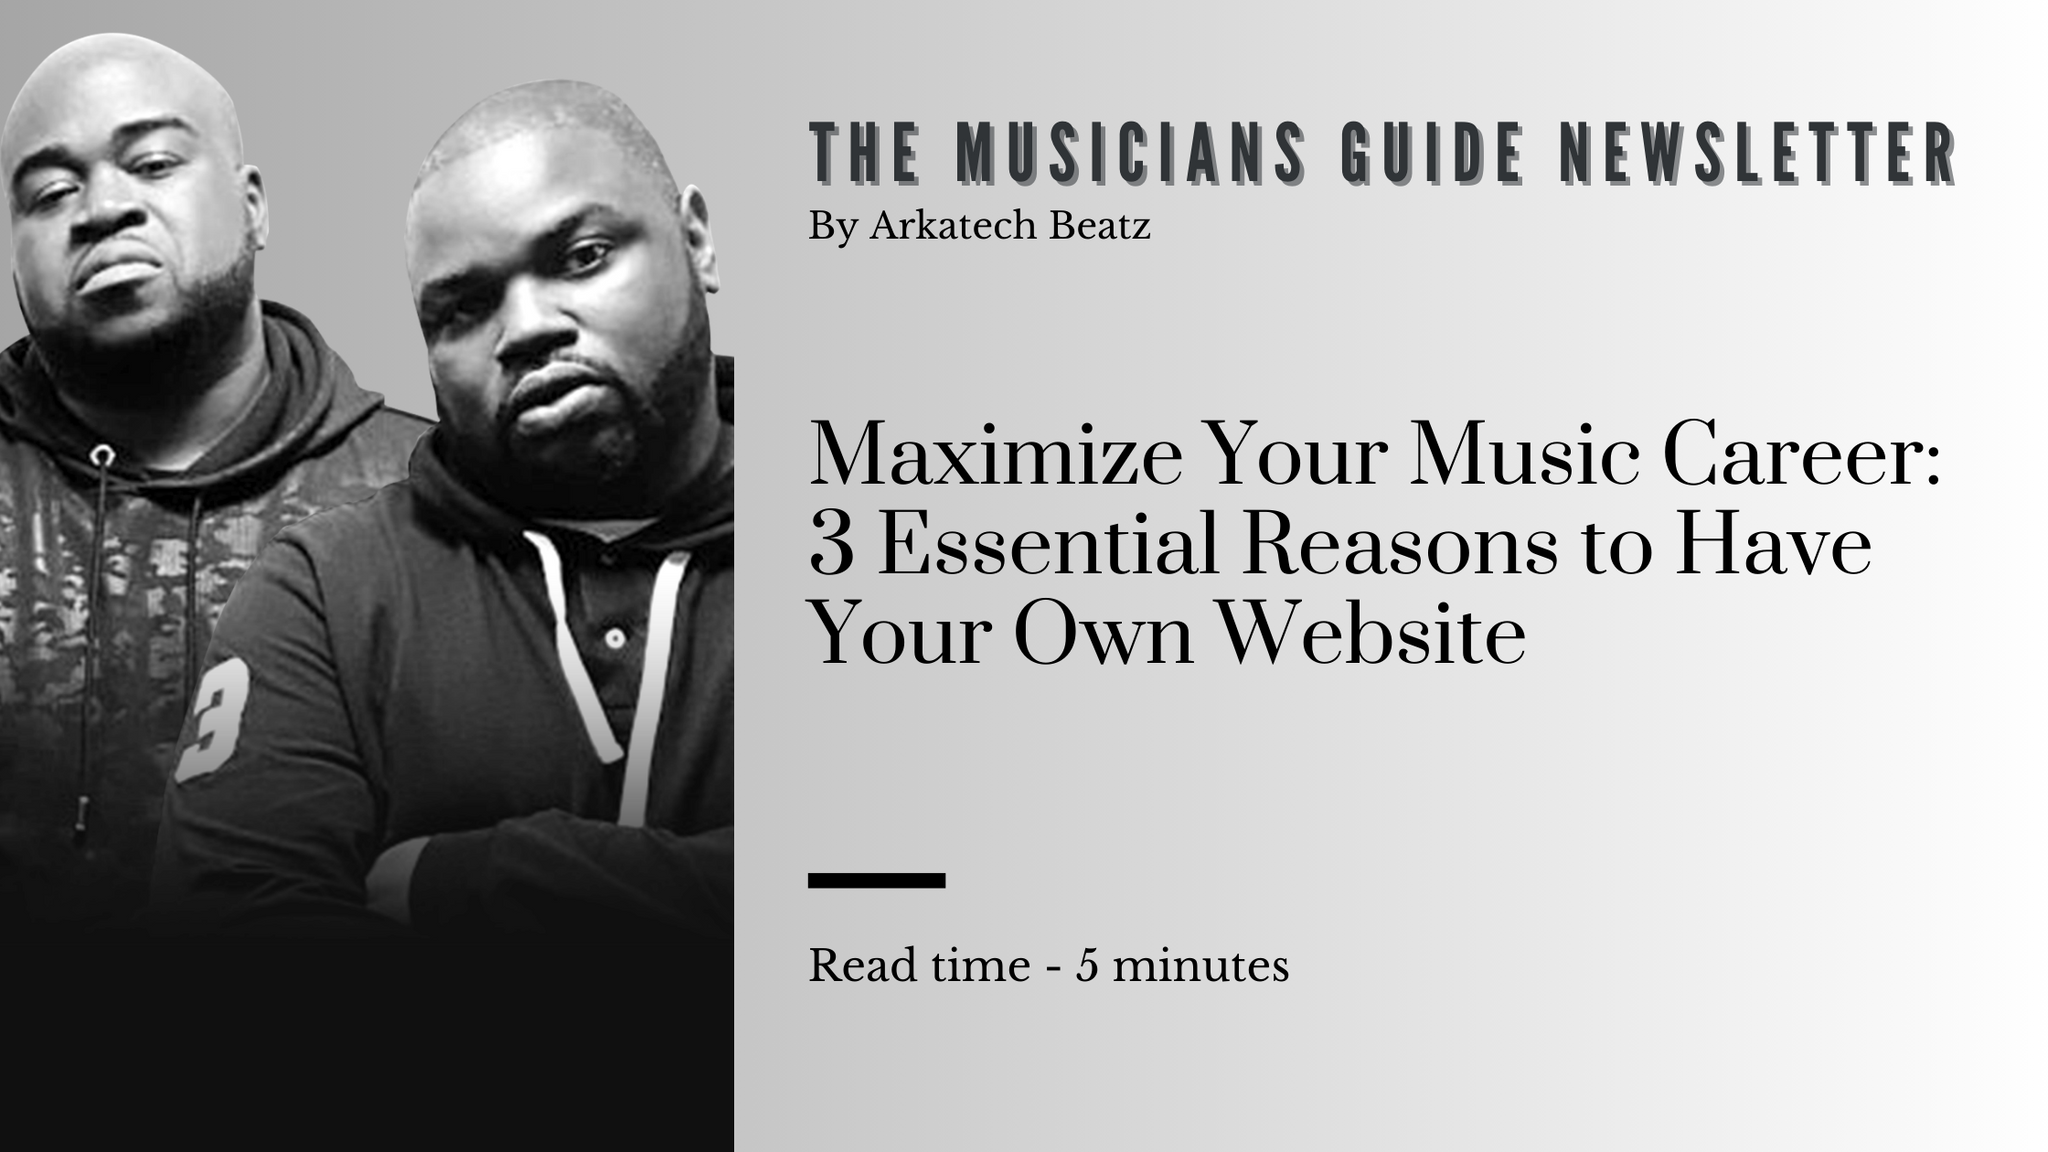 Maximize Your Music Career: 3 Essential Reasons to Have Your Own Website